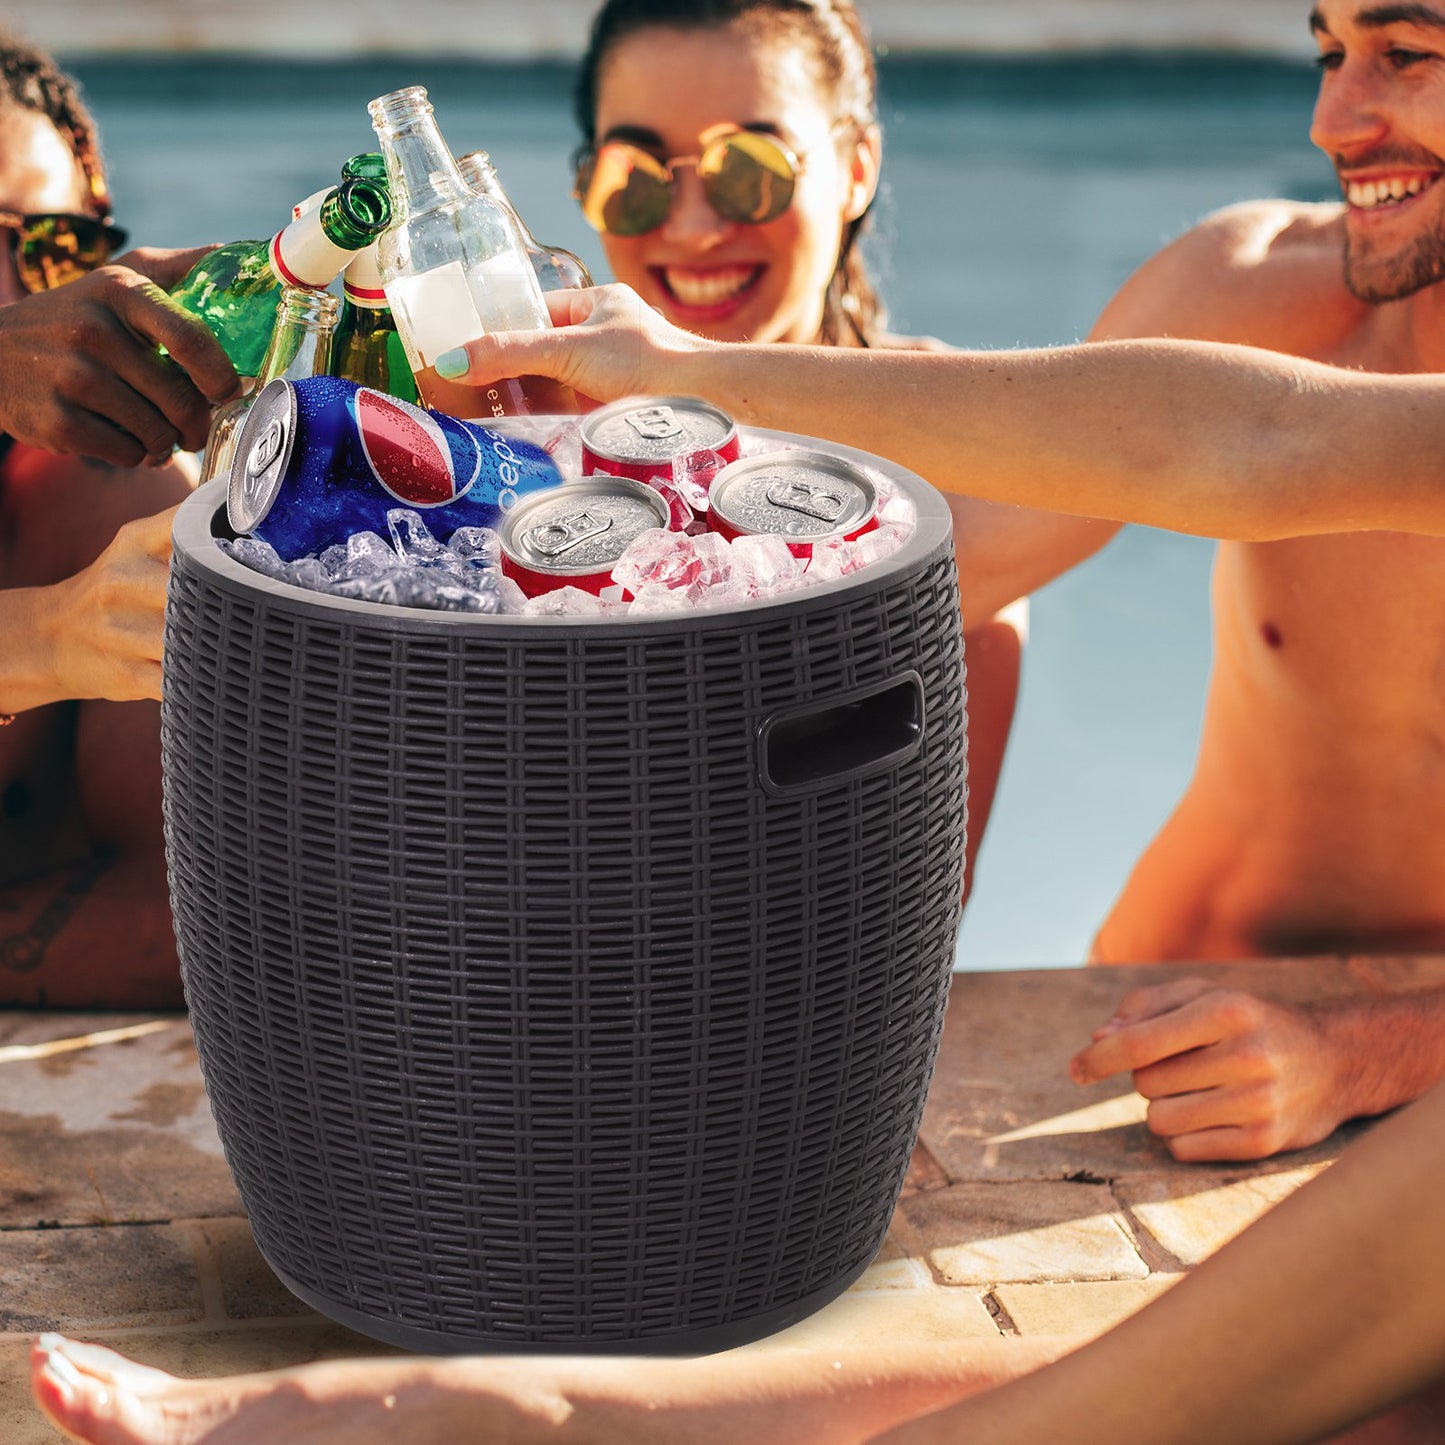 Outsunny 45L Outdoor Rattan-Effect PP Lift-Top Ice Cooler Table Black